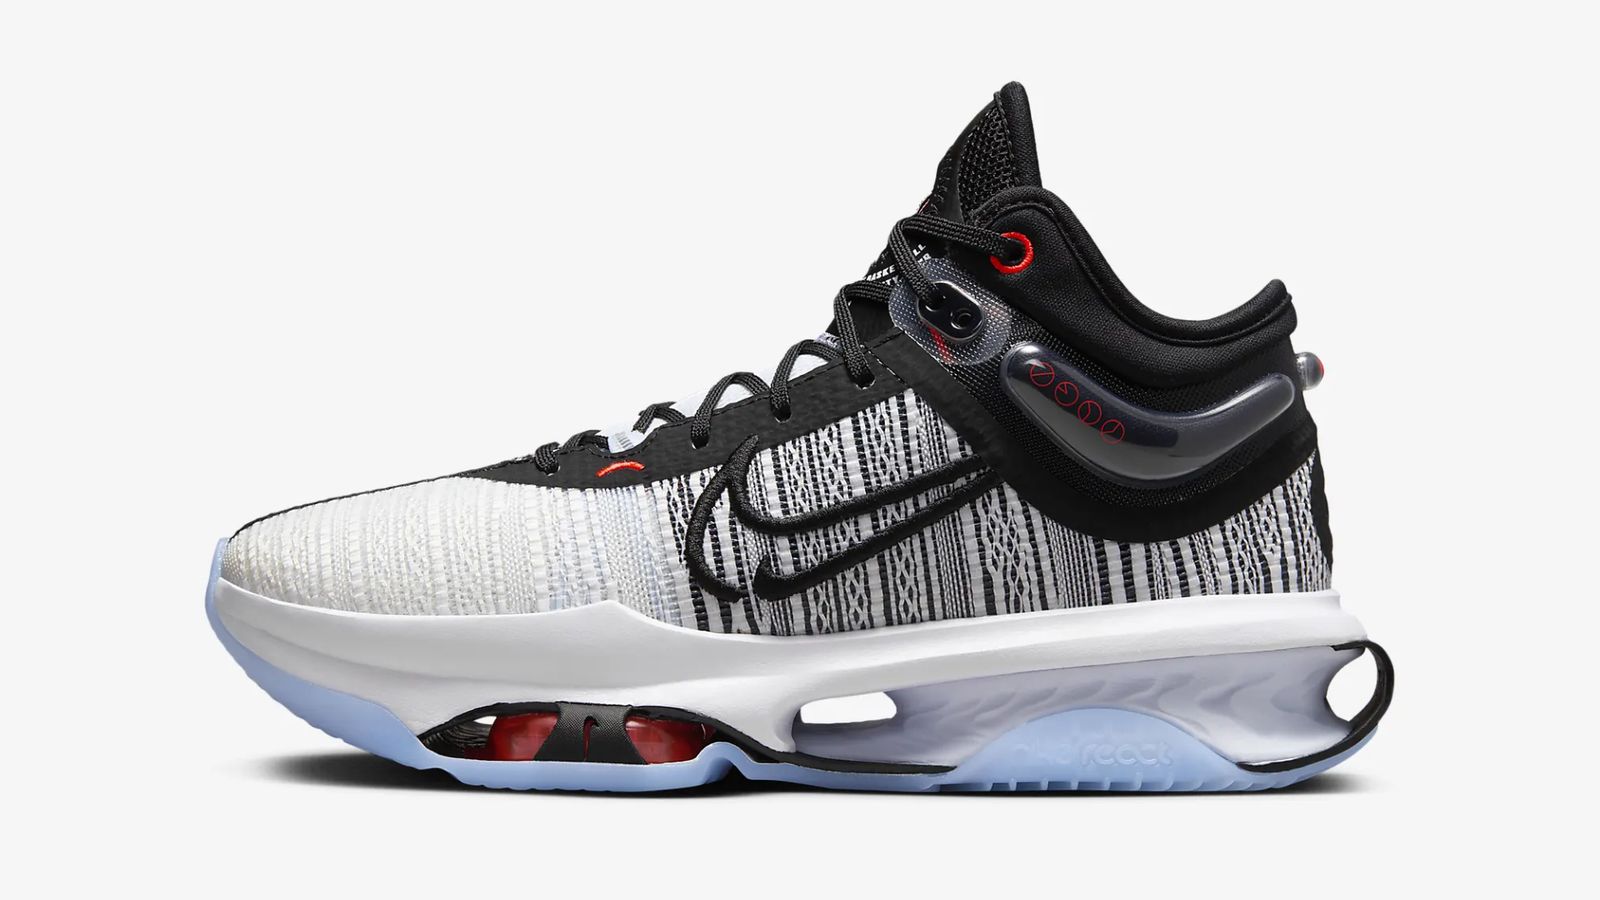 Nike G.T. Jump 2 product image of a black and white sneaker featuring red trim and an icy blue outsole.